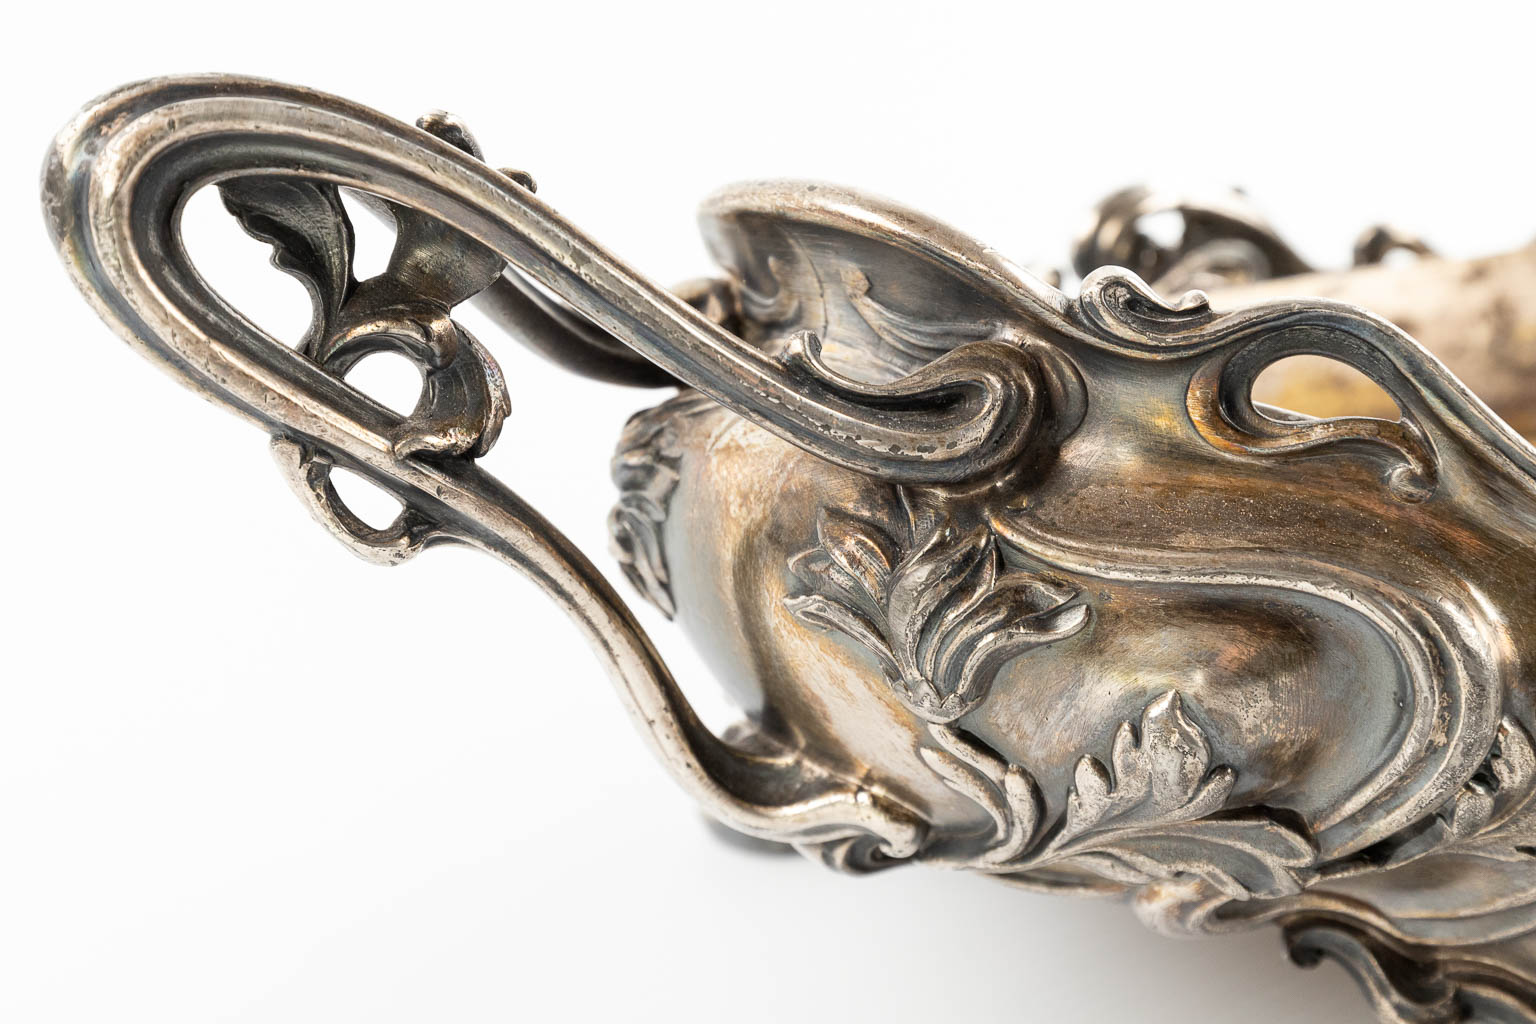 An antique table centrepiece or Jardinière, made in art nouveau style of silver-plated metal. (H:14cm)